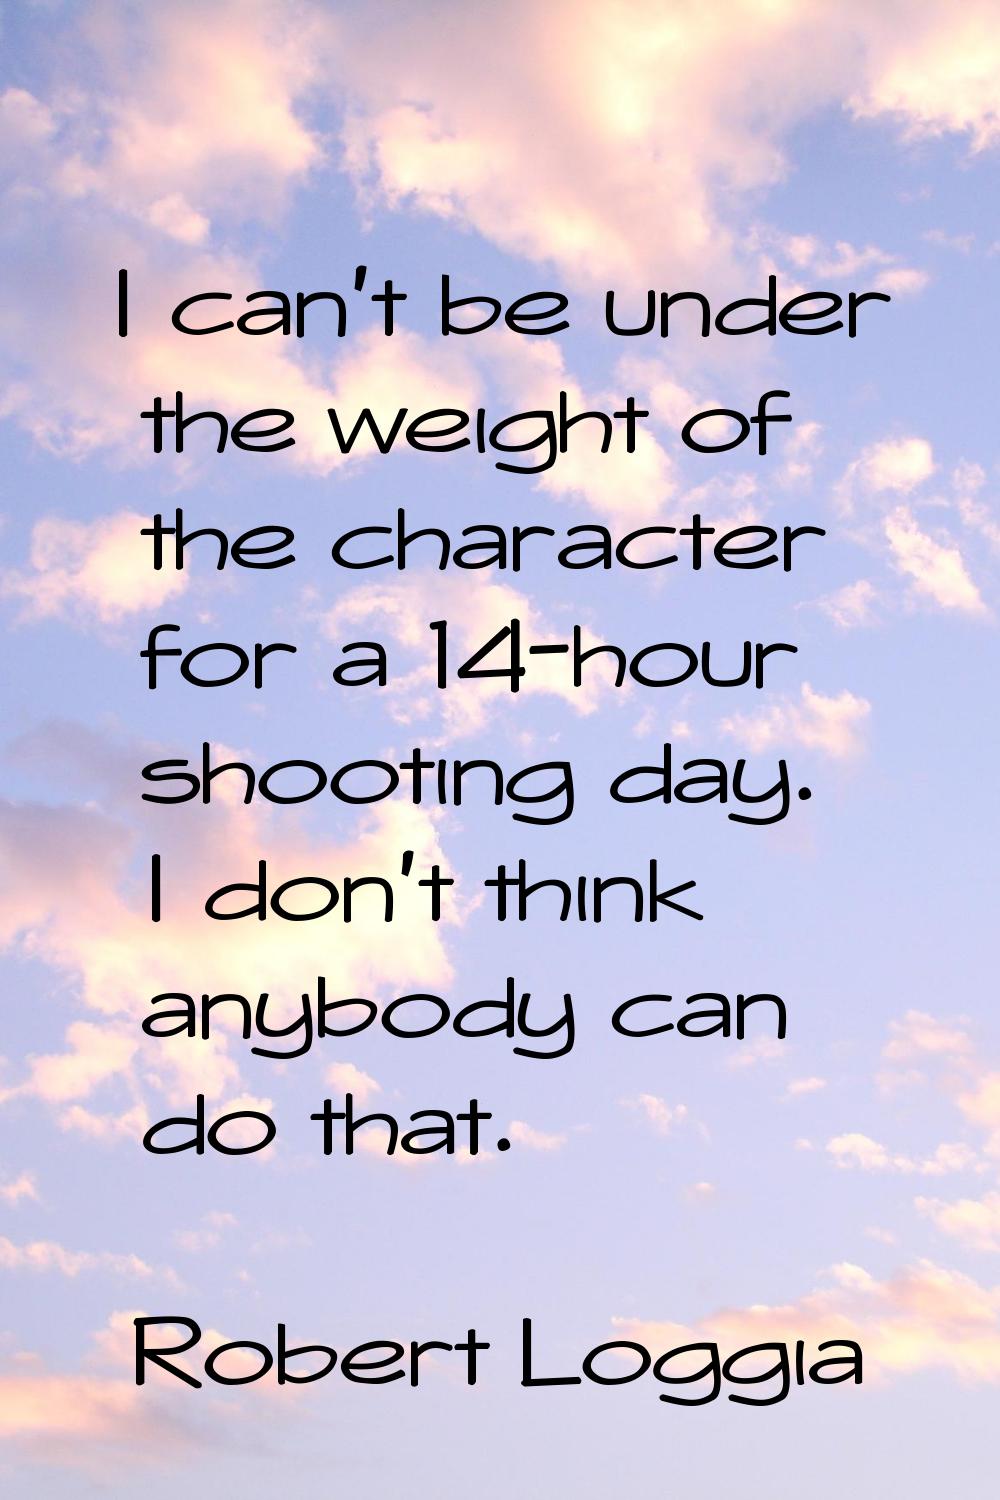 I can't be under the weight of the character for a 14-hour shooting day. I don't think anybody can 